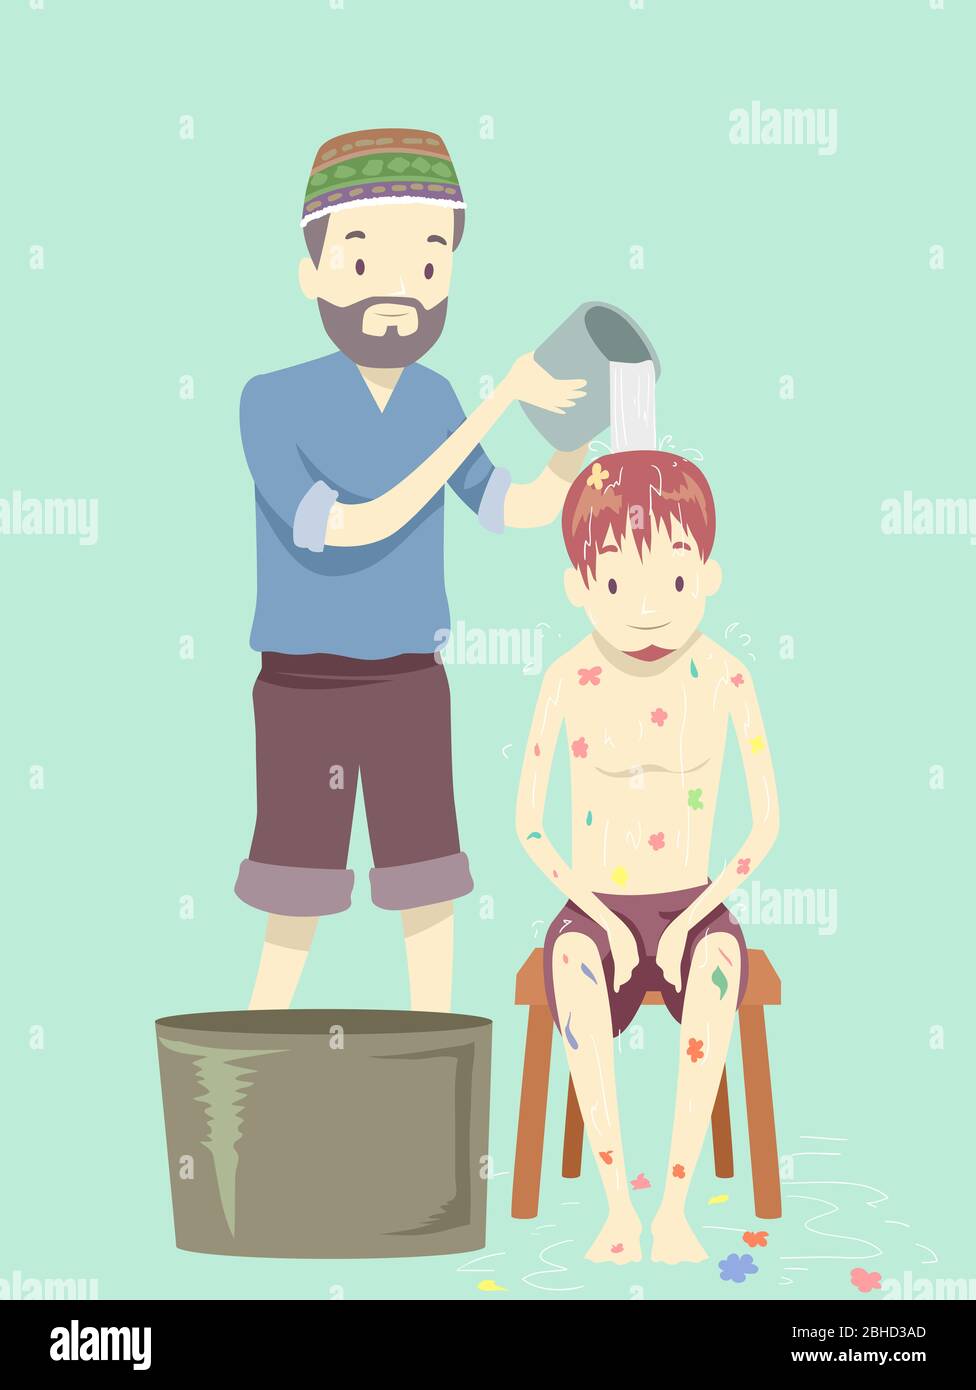 Illustration of a Shaman Man Pouring Ayahuasca Flower Bath to a Man Sitting on a Stool Stock Photo